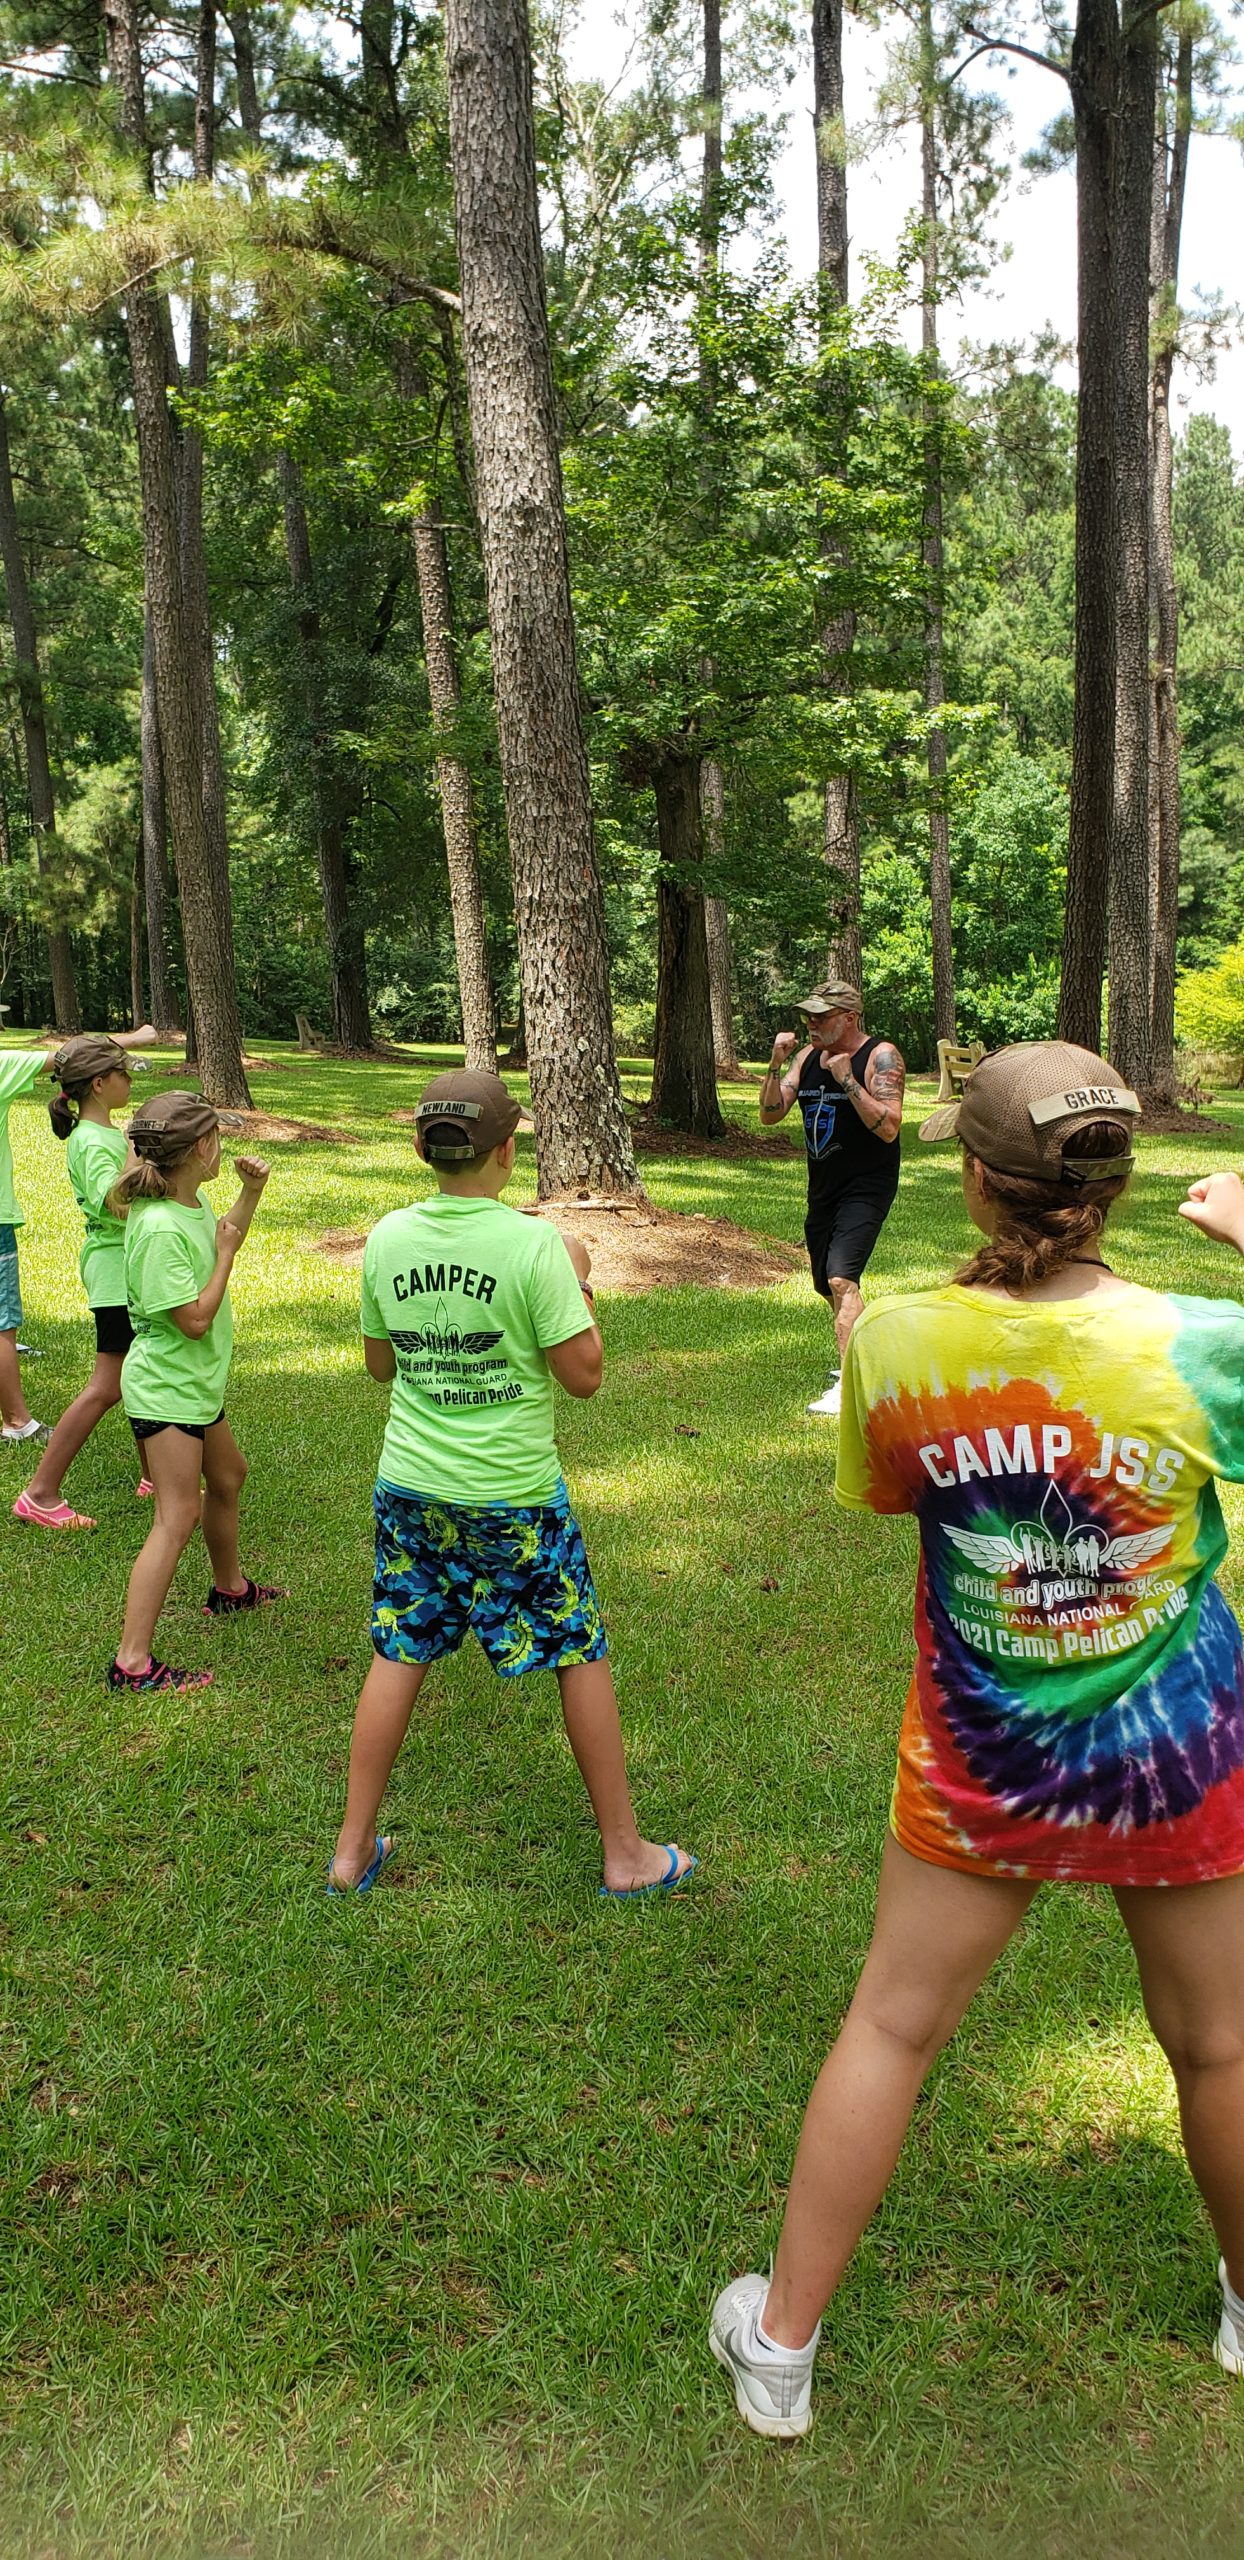 Wolverine teaching some basic martial arts moves to the campers.